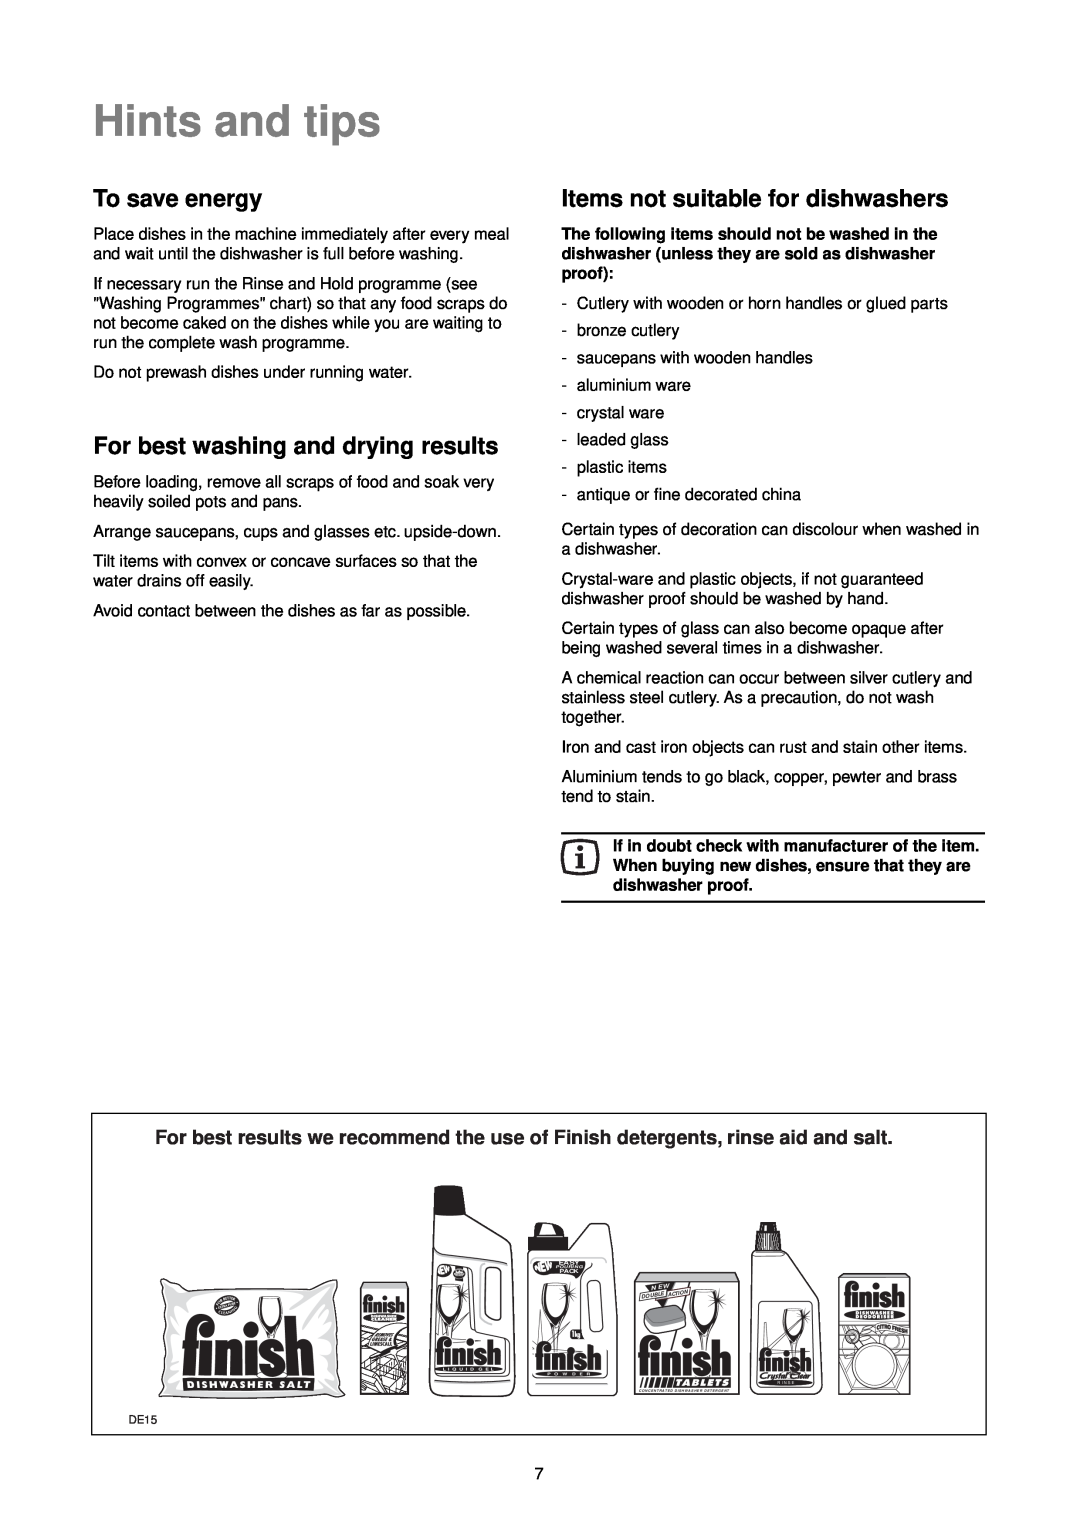 Zanussi ZT 695 Hints and tips, To save energy, For best washing and drying results, Items not suitable for dishwashers 